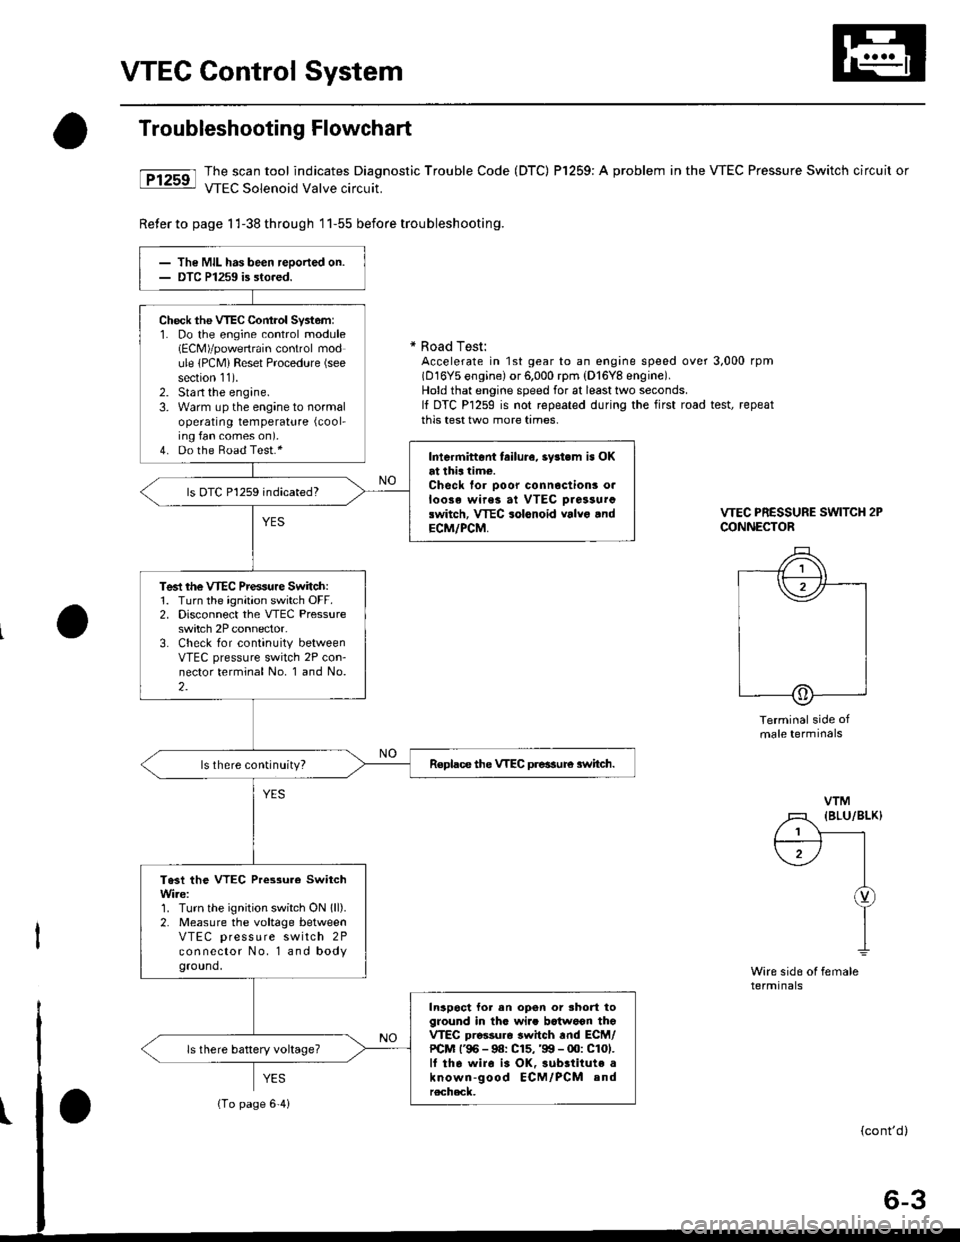 HONDA CIVIC 1997 6.G Workshop Manual VTEC Control System
Troubleshooting Flowchart
tFtrsrl #ilH:::lj1t:"J:T,?ffnostic 
rrouble code (Drc) Pr25e: A probrem in the vrEc Pressure switch circuit or
Reter to page 1 l-38 th roug h 1 1-55 befor